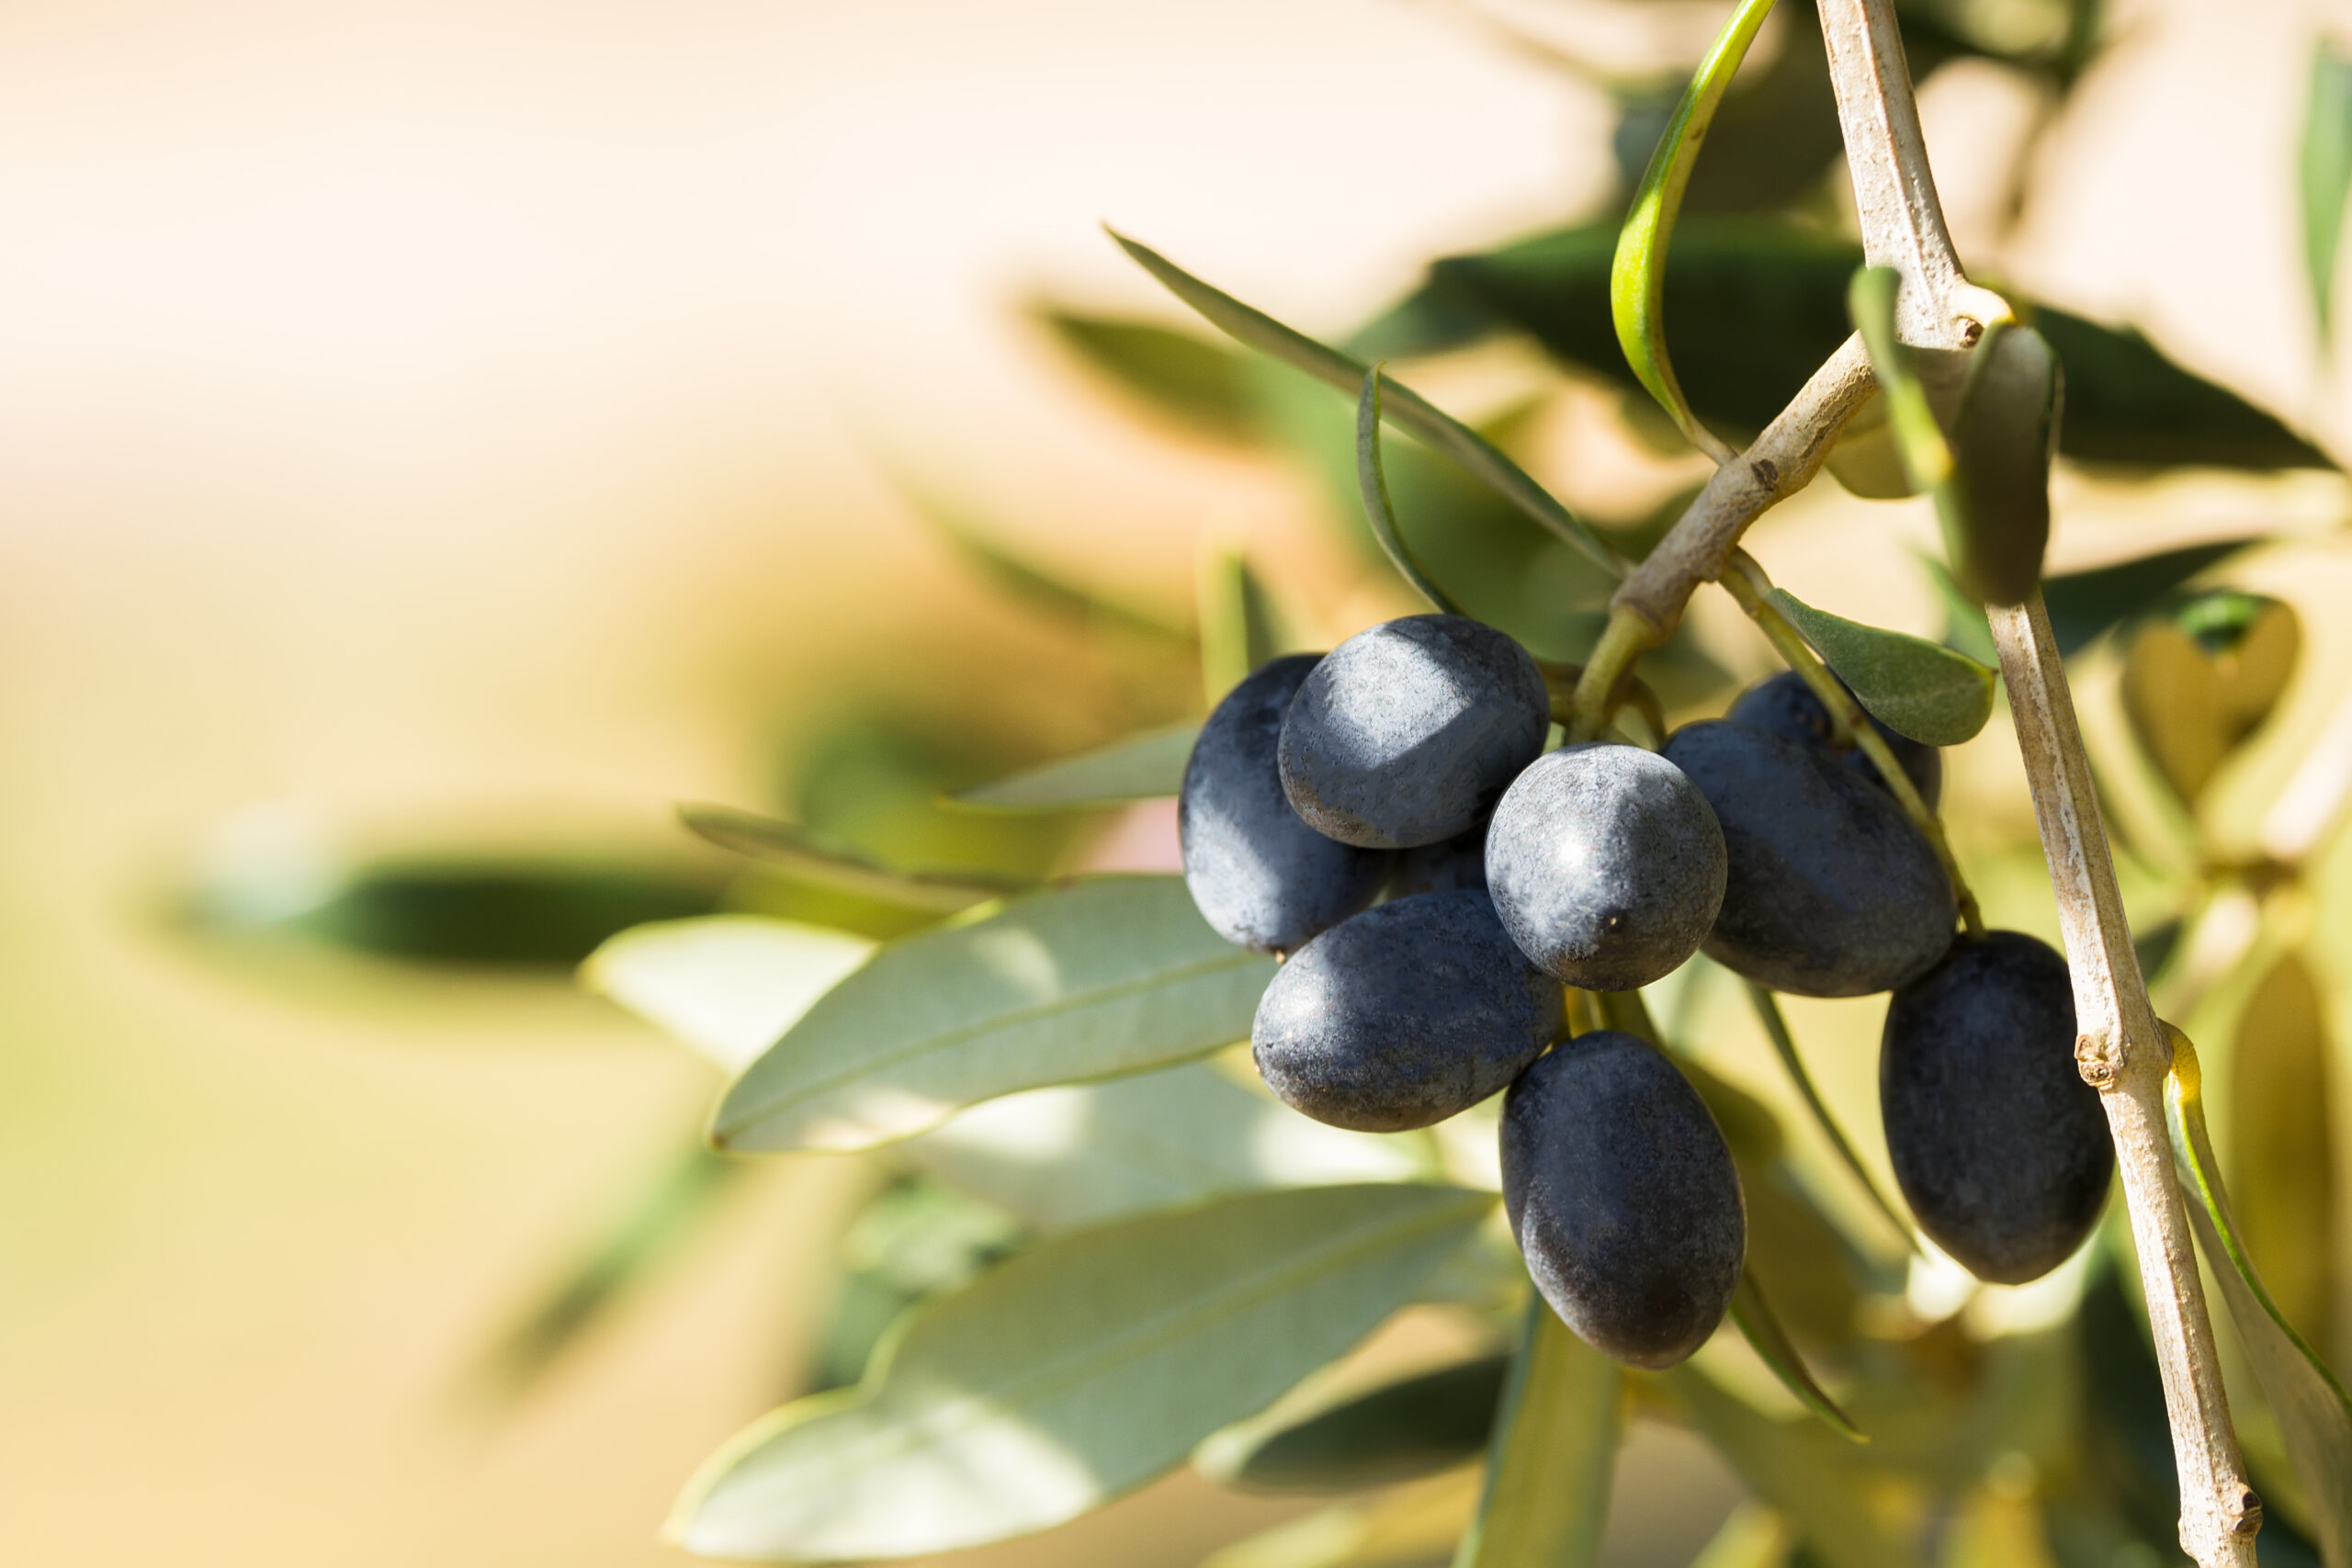 Close up of an atmospheric image of apulian black olives hanging from a tree with late sun flare